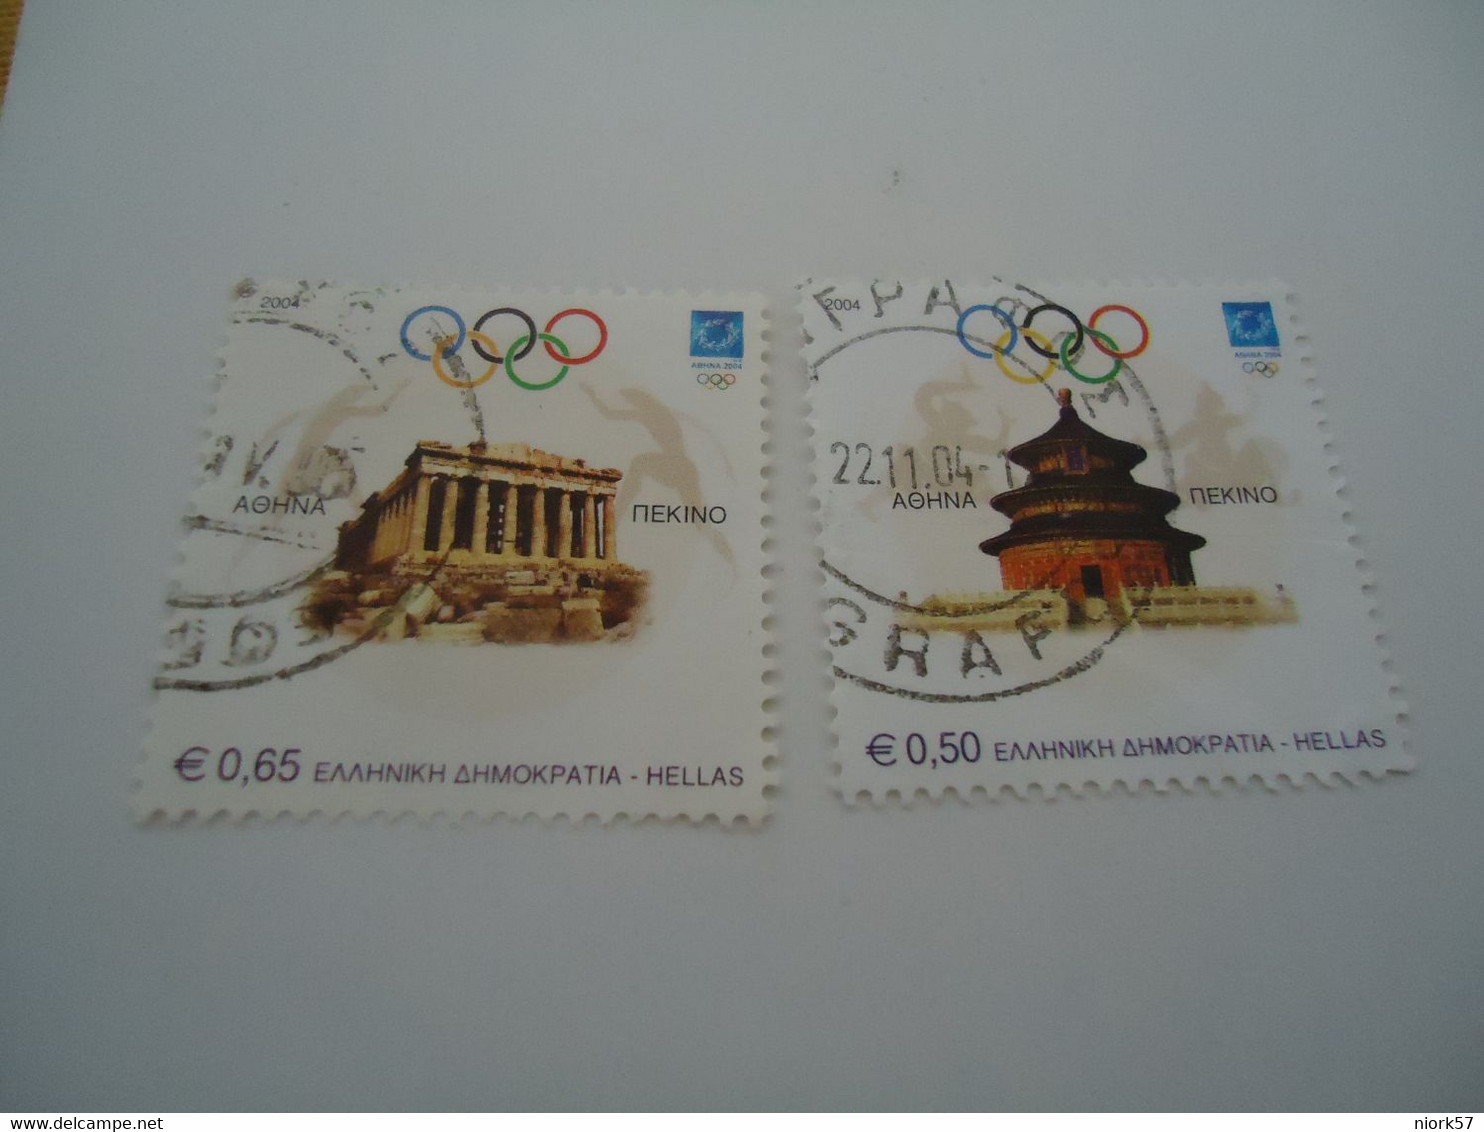 GREECE USED STAMPS SET 2 OLYMPIC GAMES 2004 ATHENS BEIGING - Zomer 2004: Athene - Paralympics